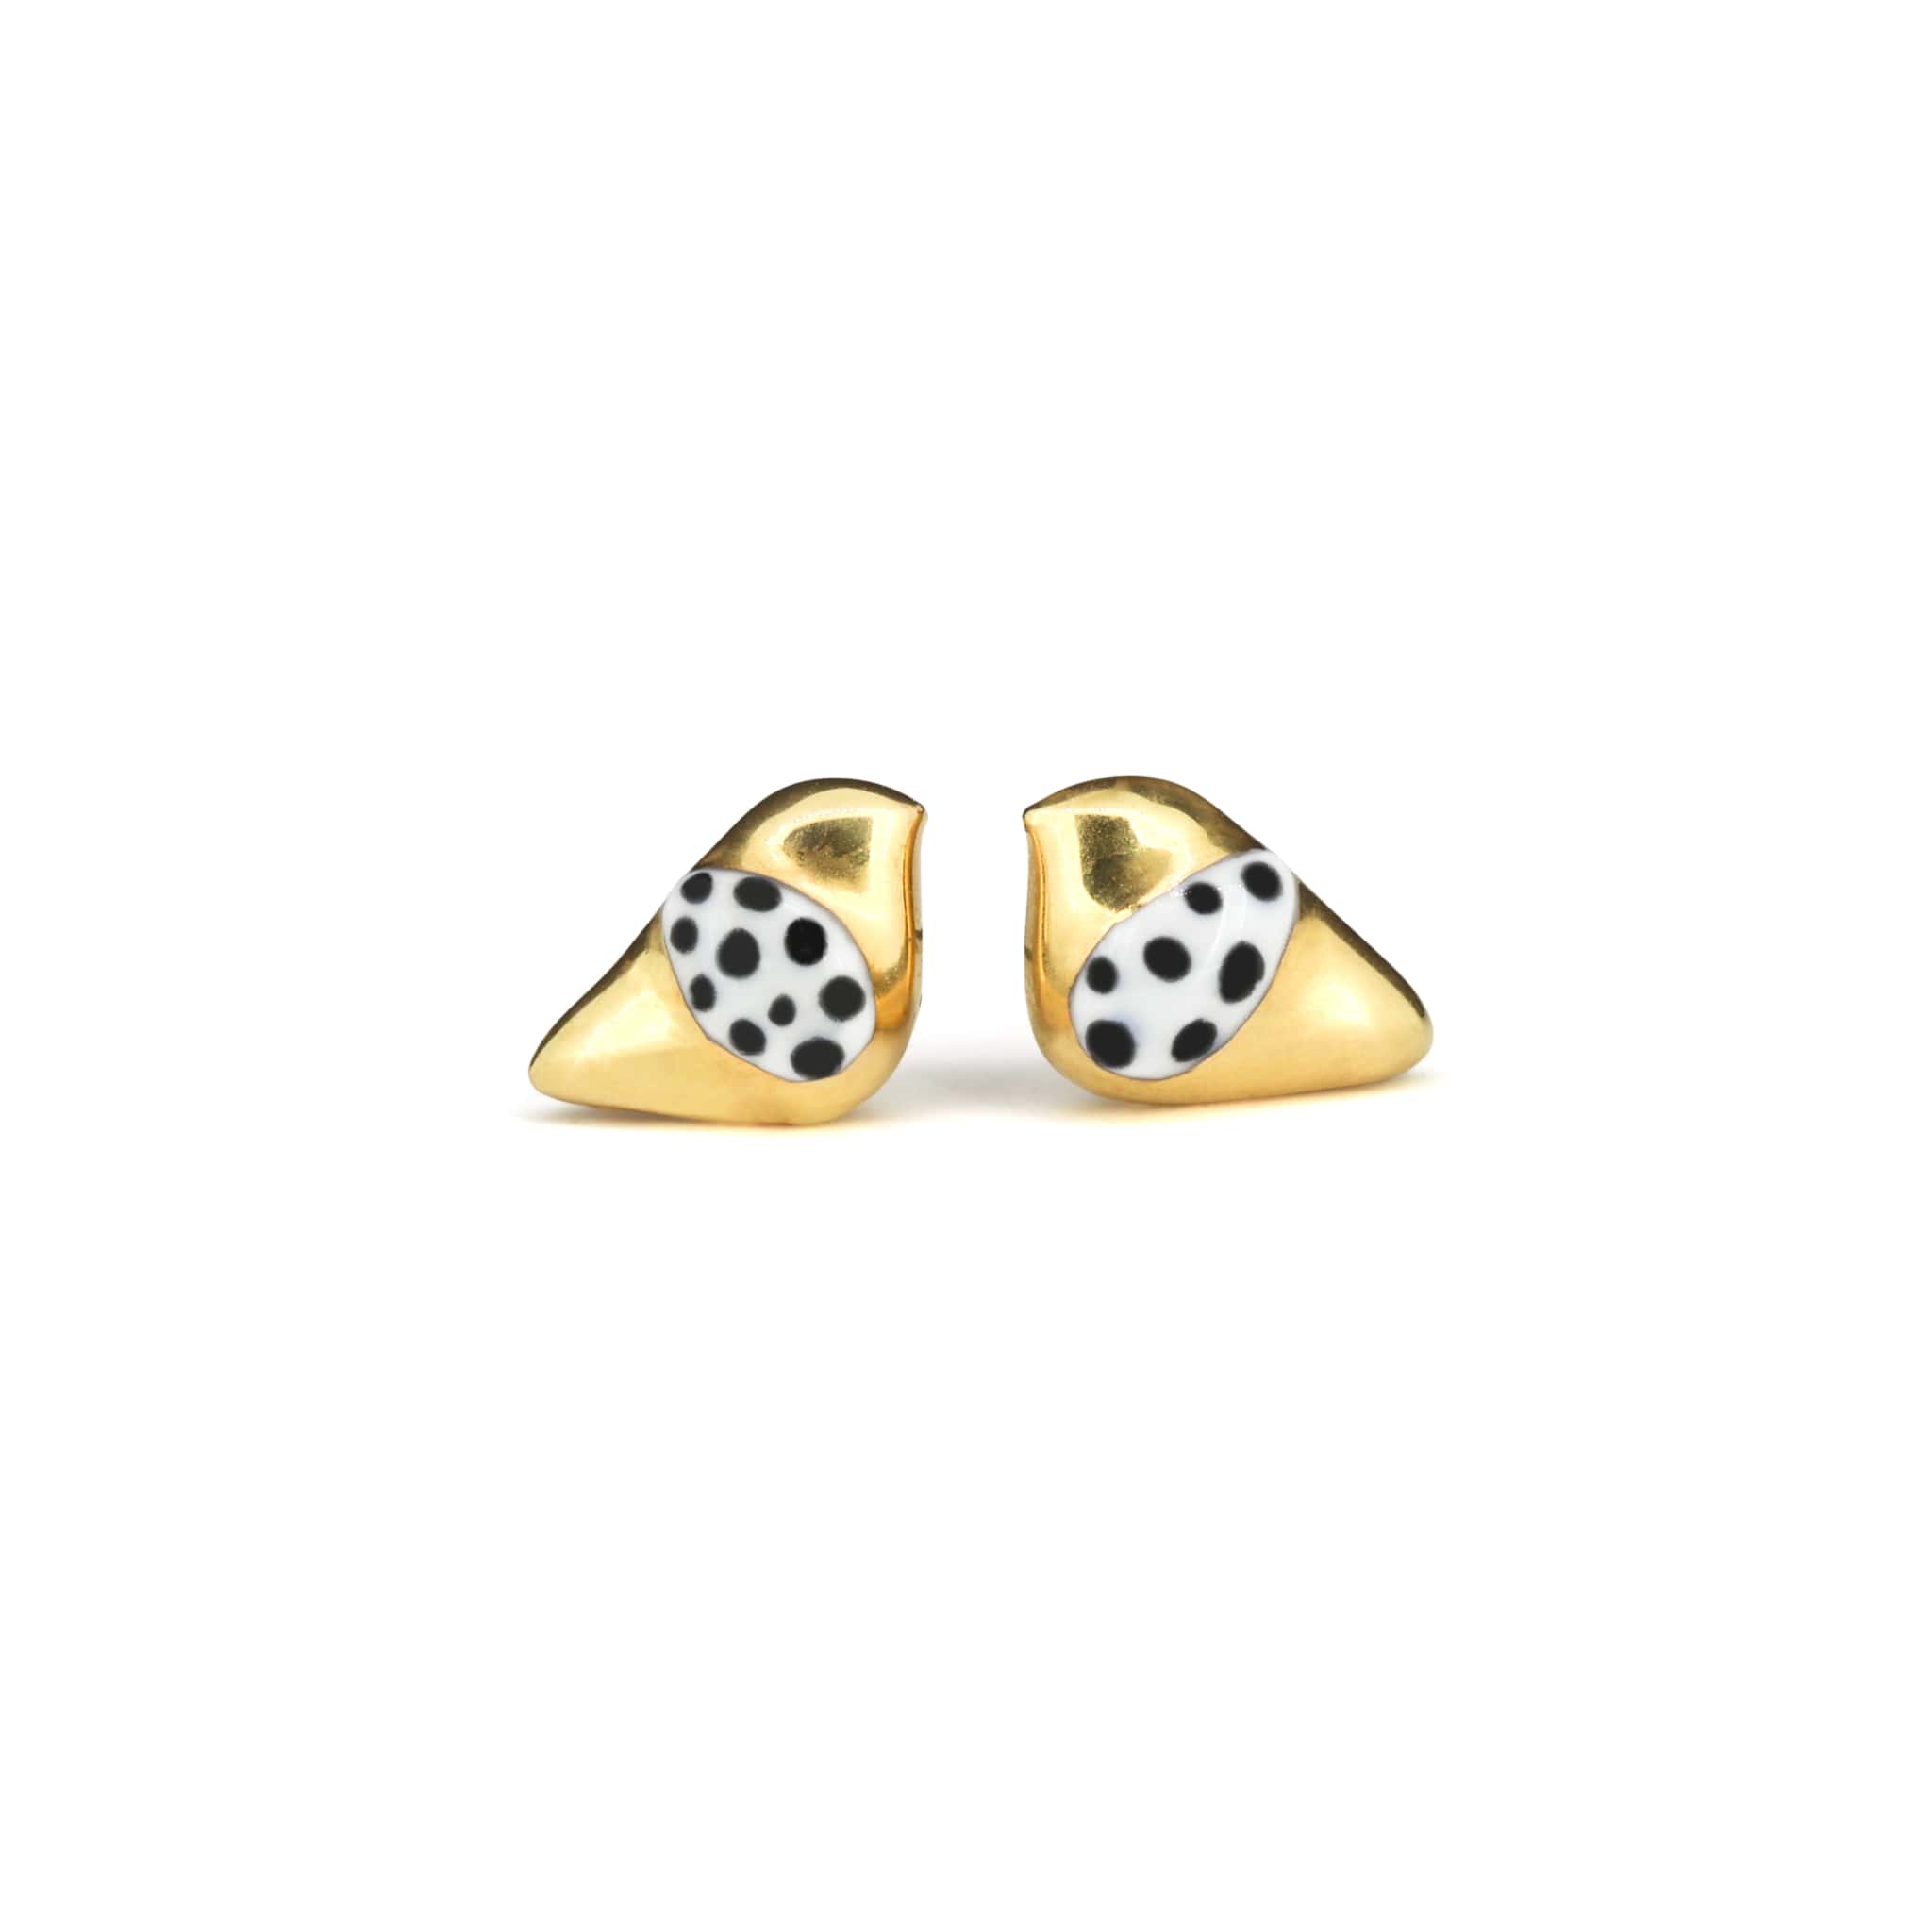 Golden bird studs with polka dot wings